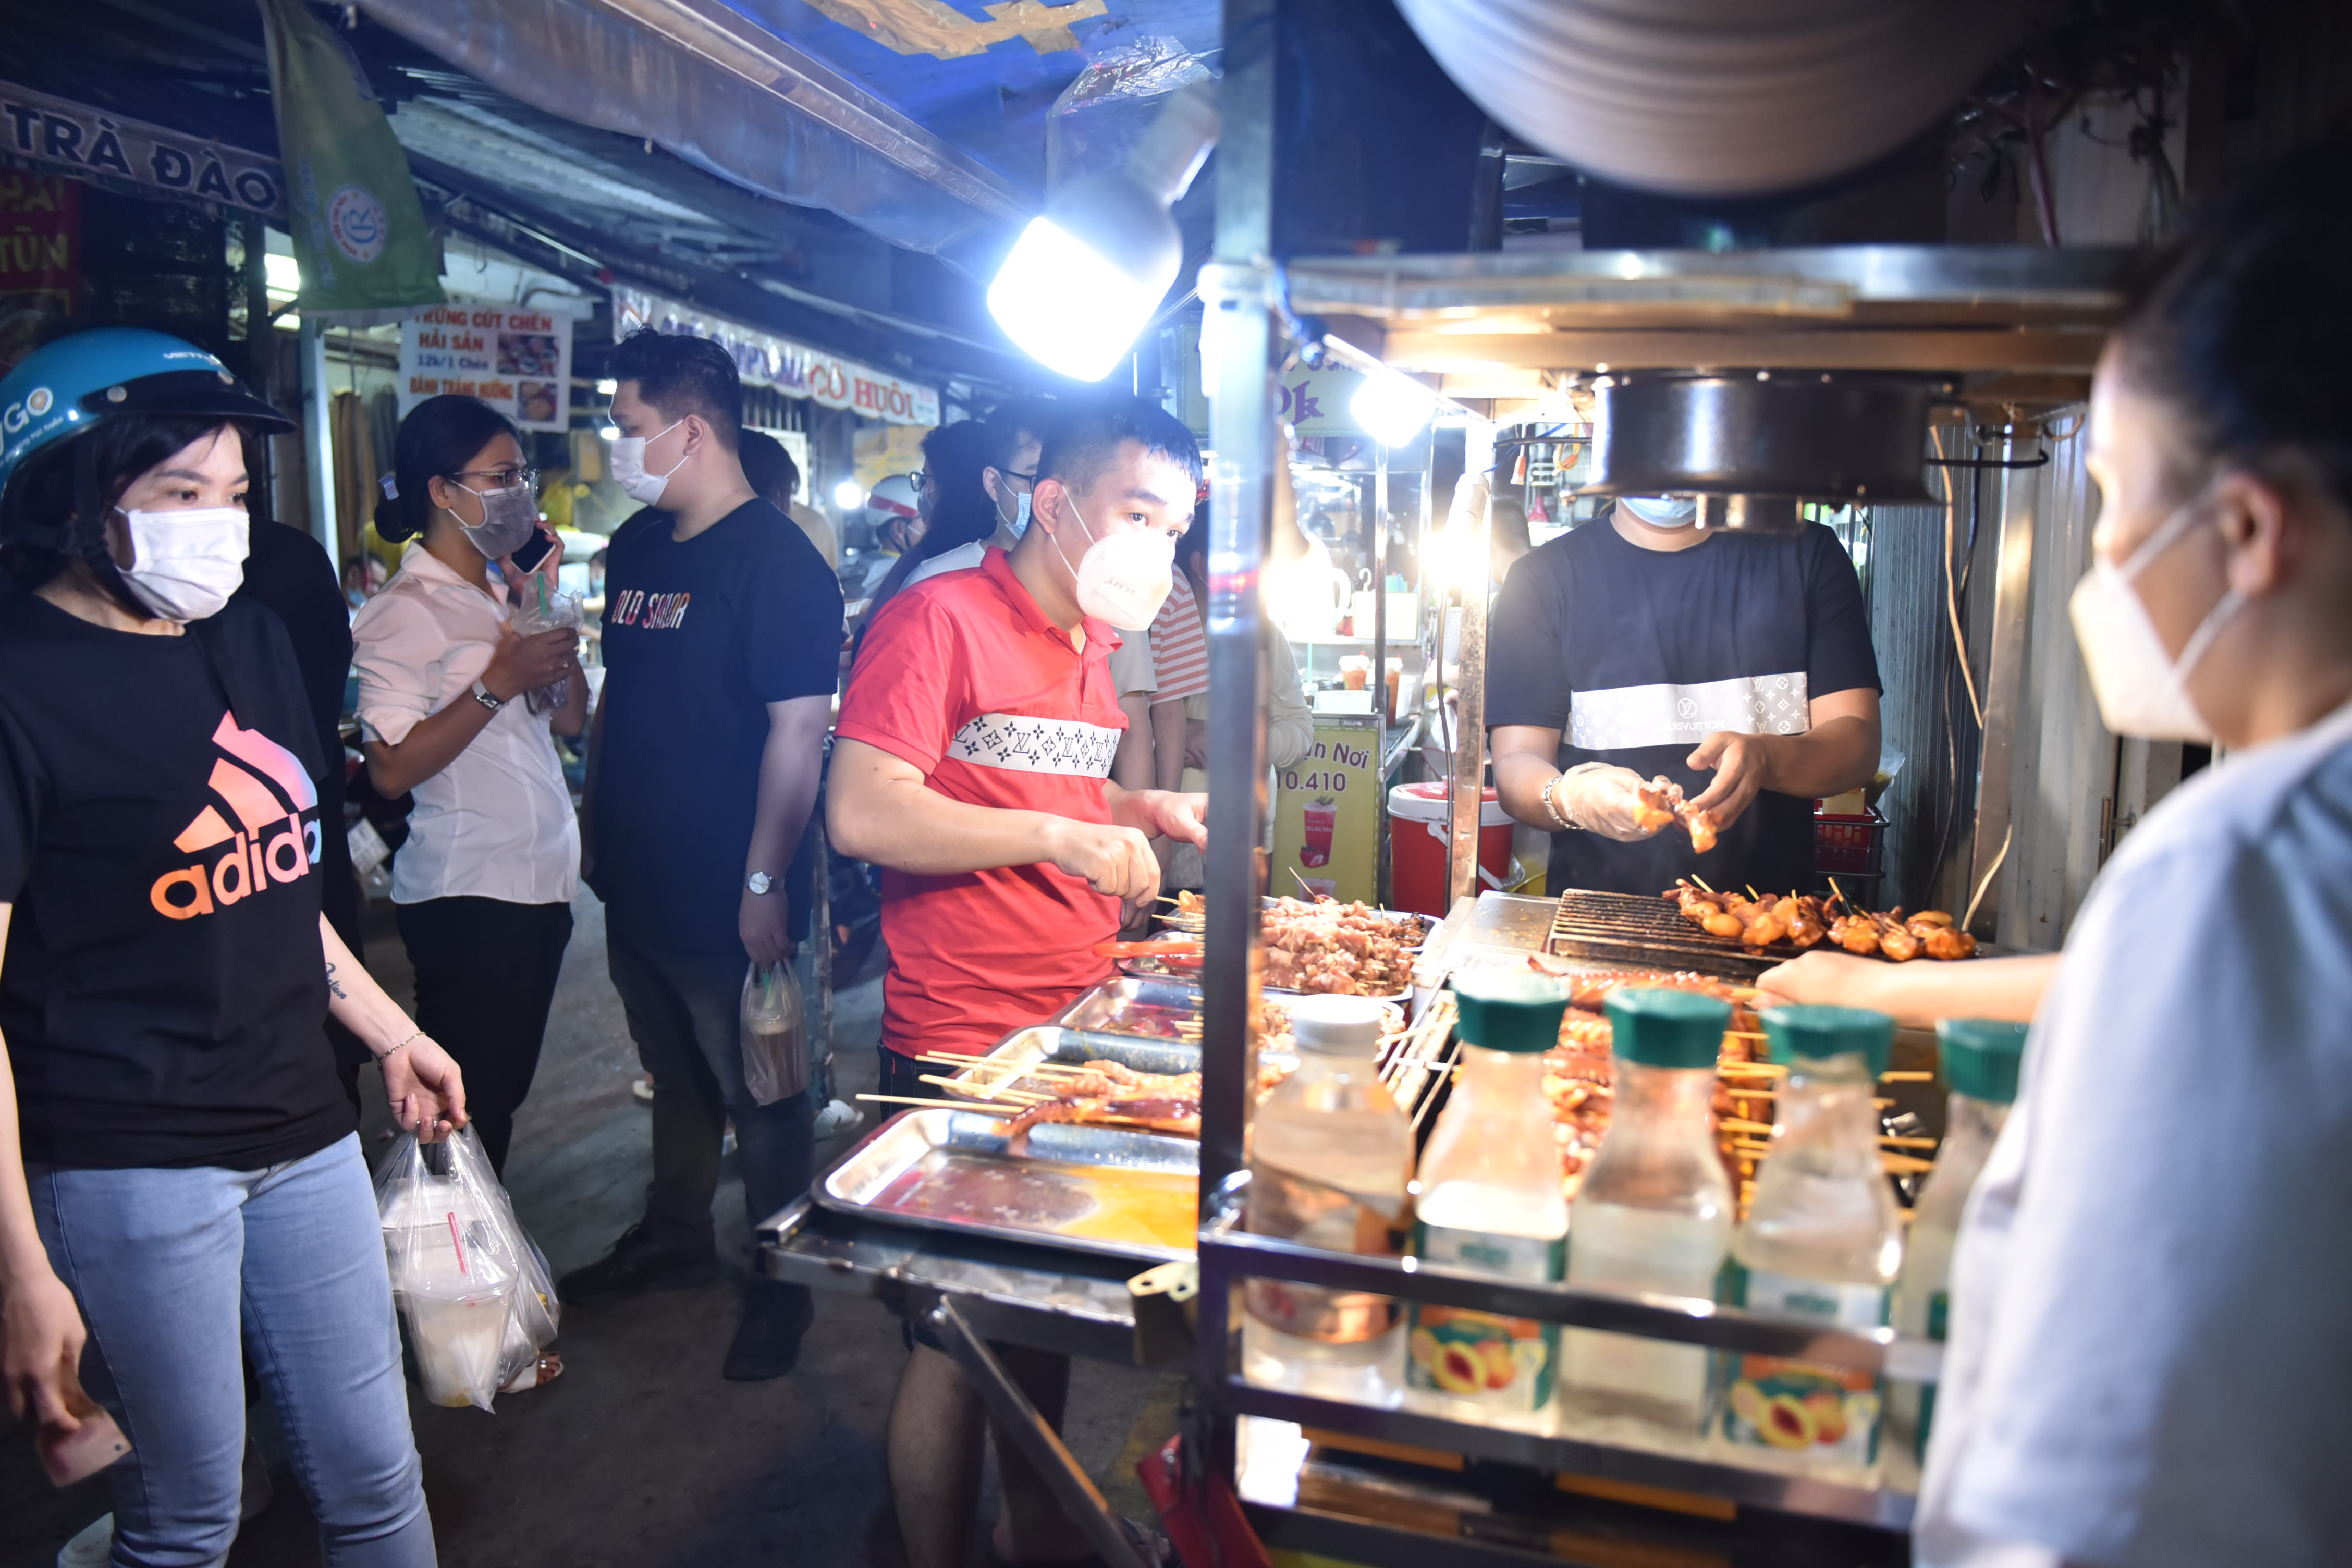 Customers wait for their food at a BBQ stall at Ho Thi Ky Food Street in Ho Chi Minh City’s District 10 on October 19, 2021. Photo: Ngoc Phuong / Tuoi Tre